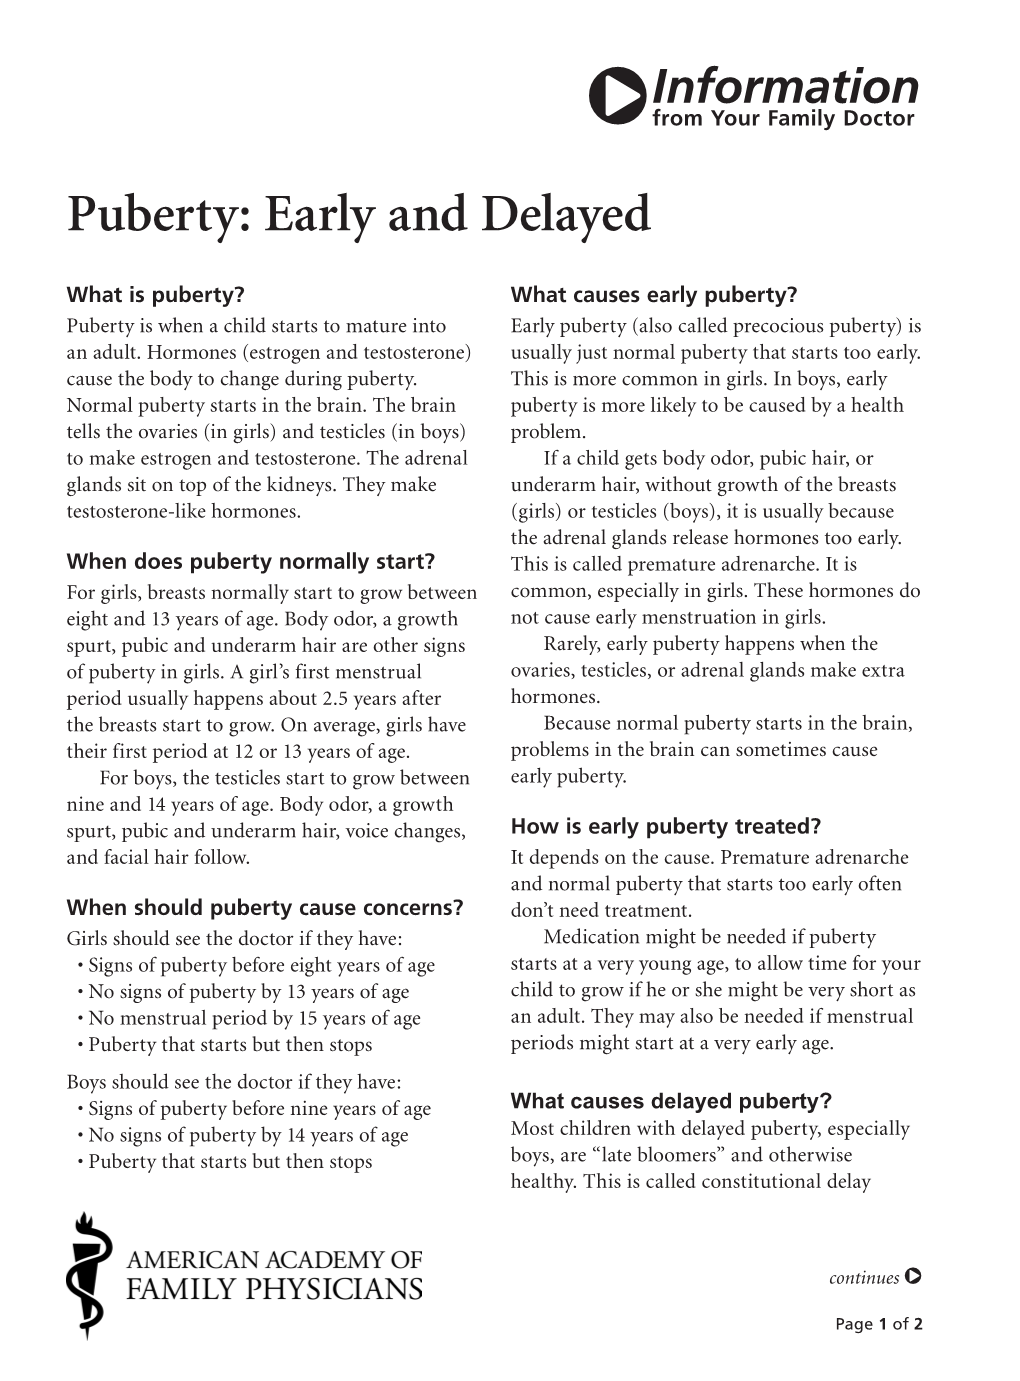 Puberty: Early and Delayed